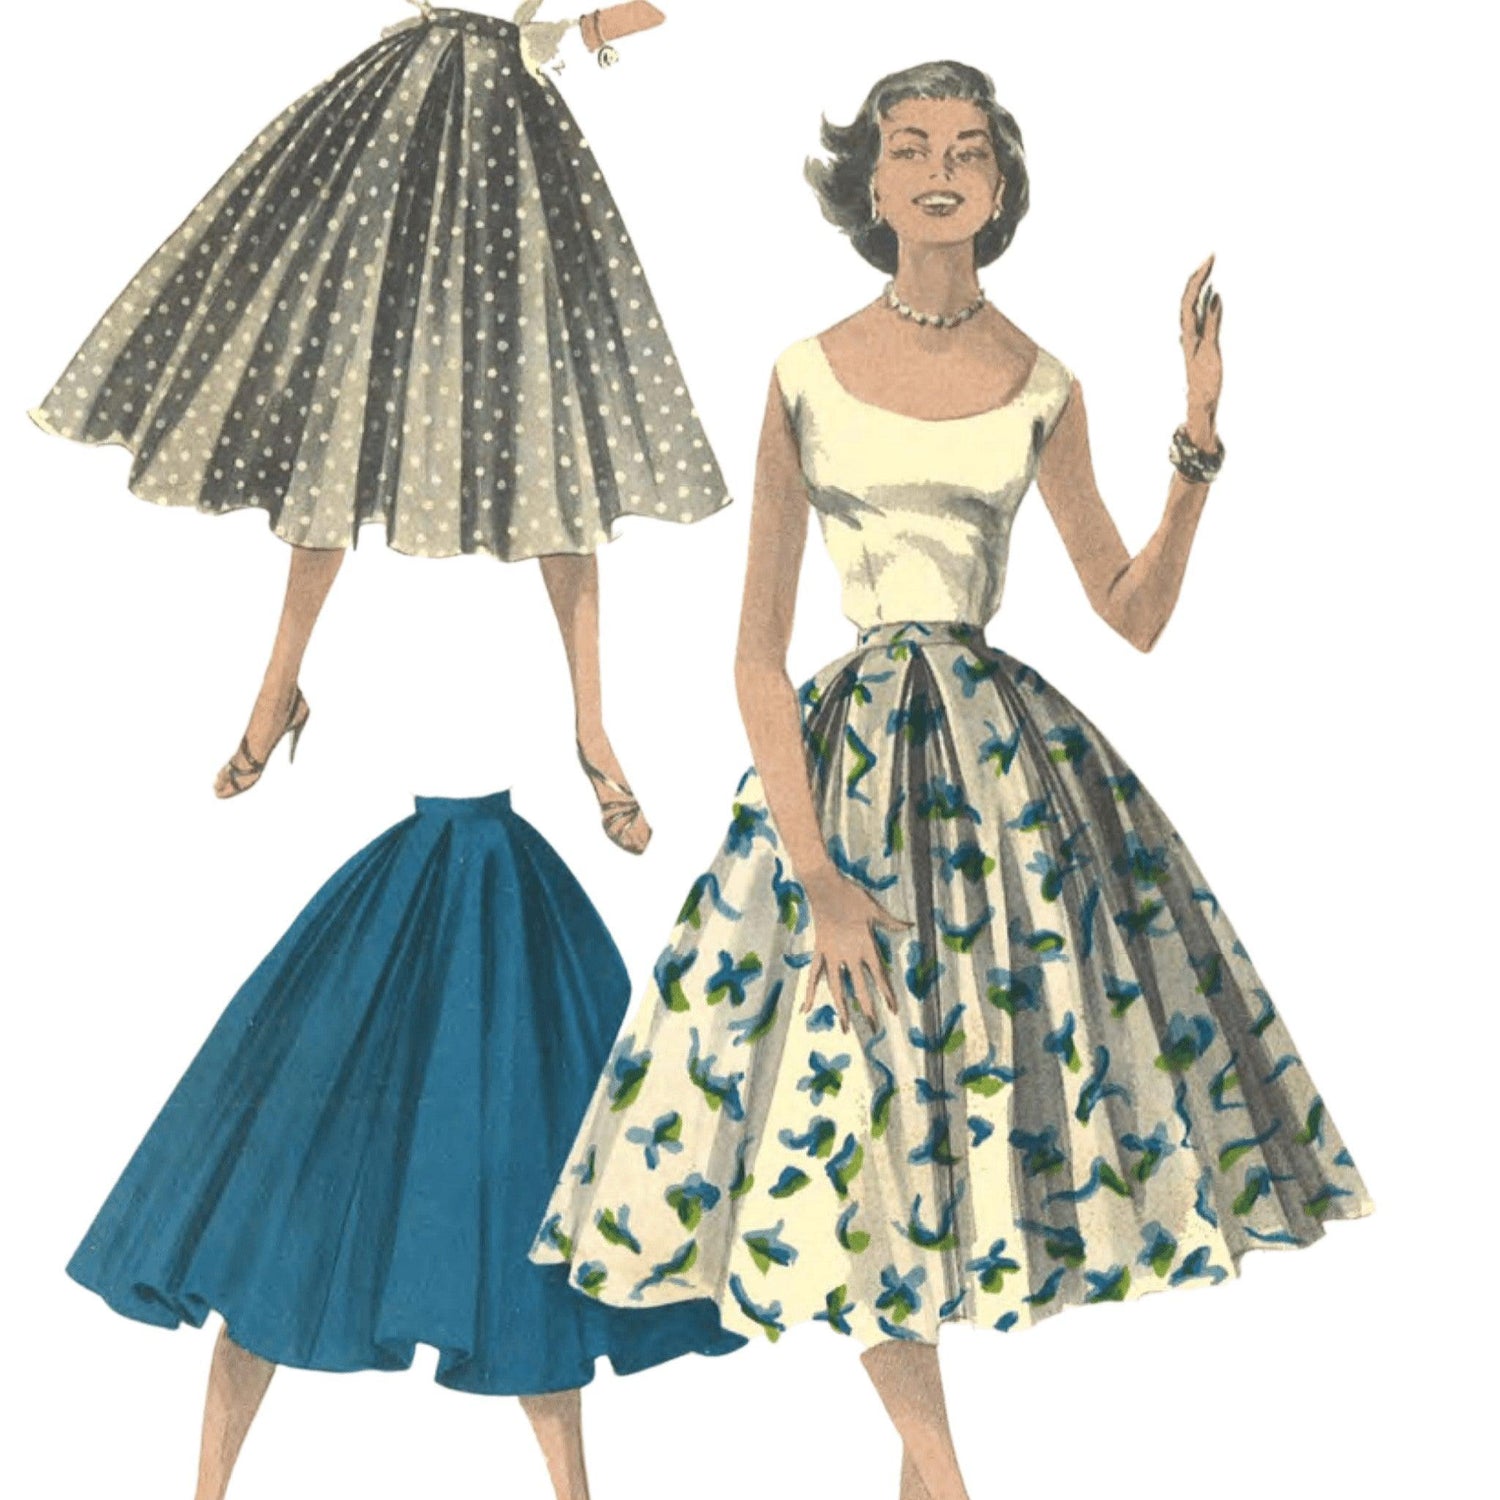 Vintage 1950s Pattern, 'Easy to Sew' Rockabilly Full Circle Skirt